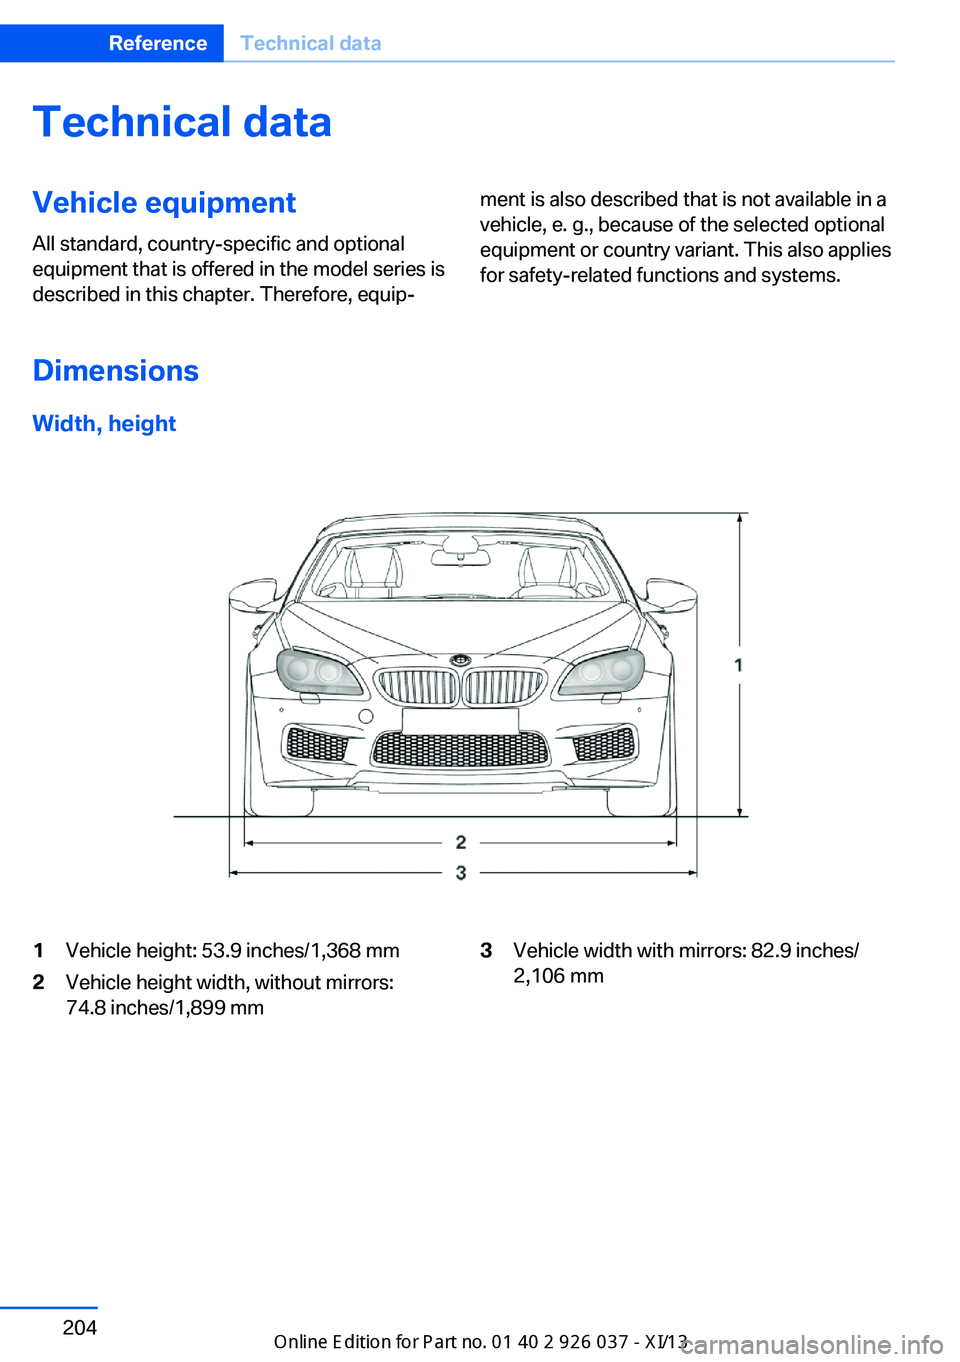 BMW M6 CONVERTIBLE 2013 F12 Owners Manual Technical dataVehicle equipment
All standard, country-specific and optional
equipment that is offered in the model series is
described in this chapter. Therefore, equip‐ment is also described that i